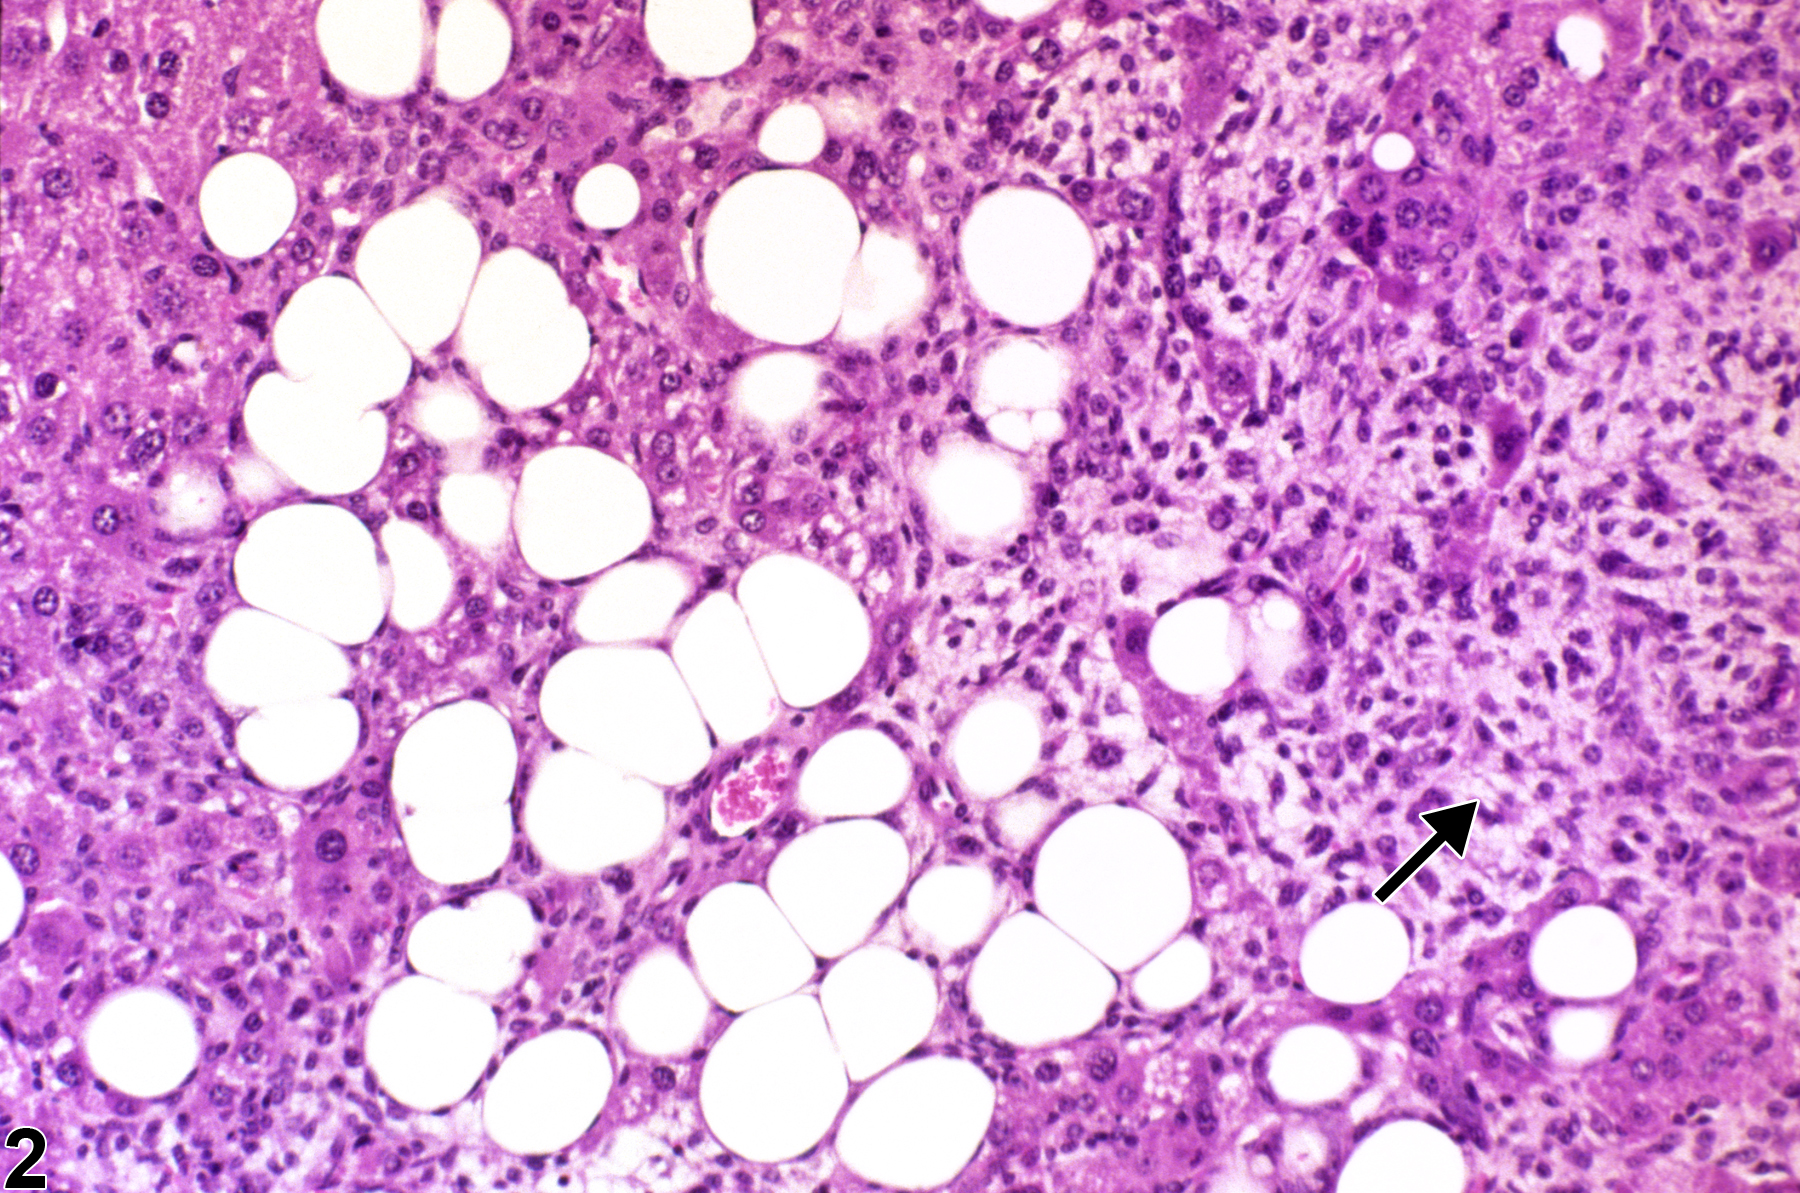 Image of hyperplasia in the liver from a female B6C3F1 mouse in a chronic study